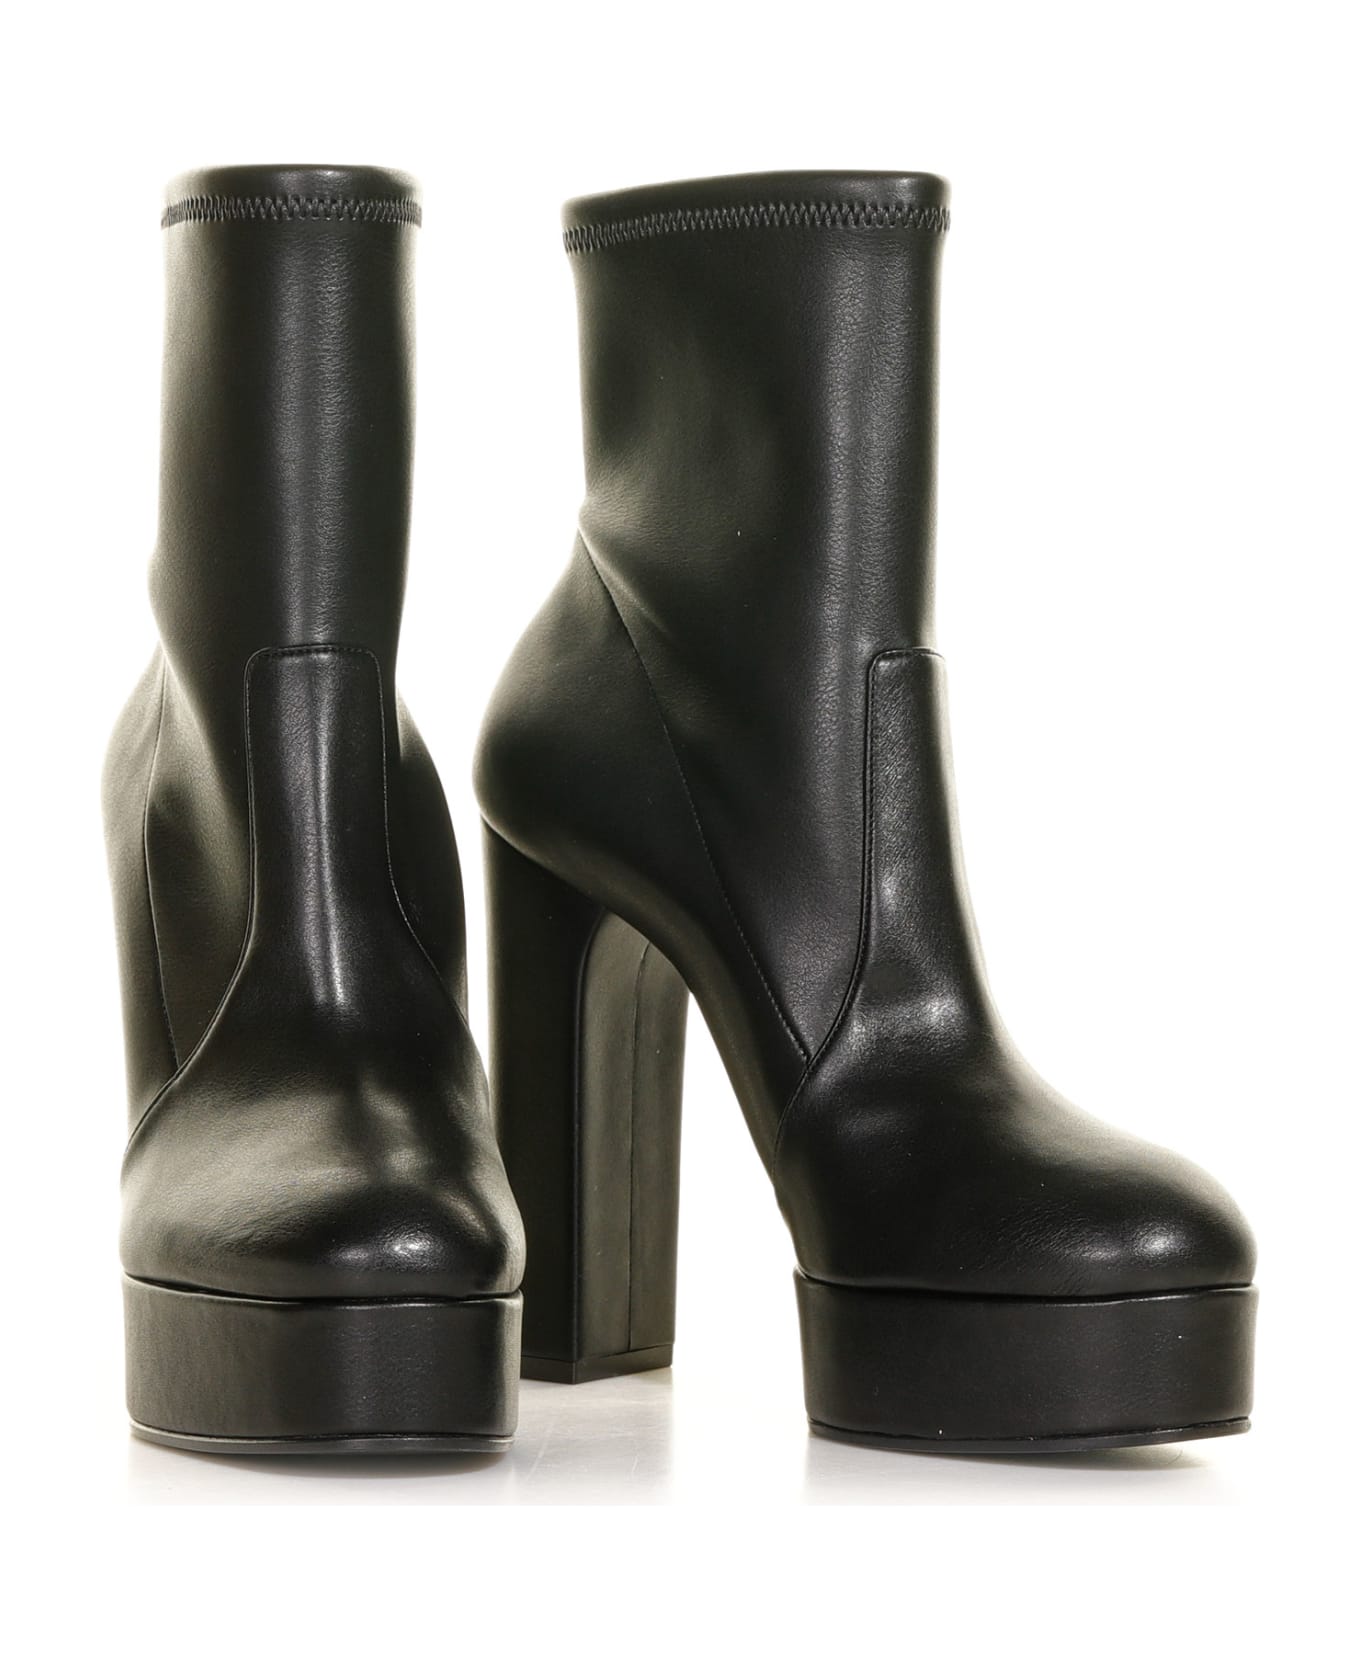 Casadei Platform Ankle Boot In Nappa Leather - NERO ブーツ